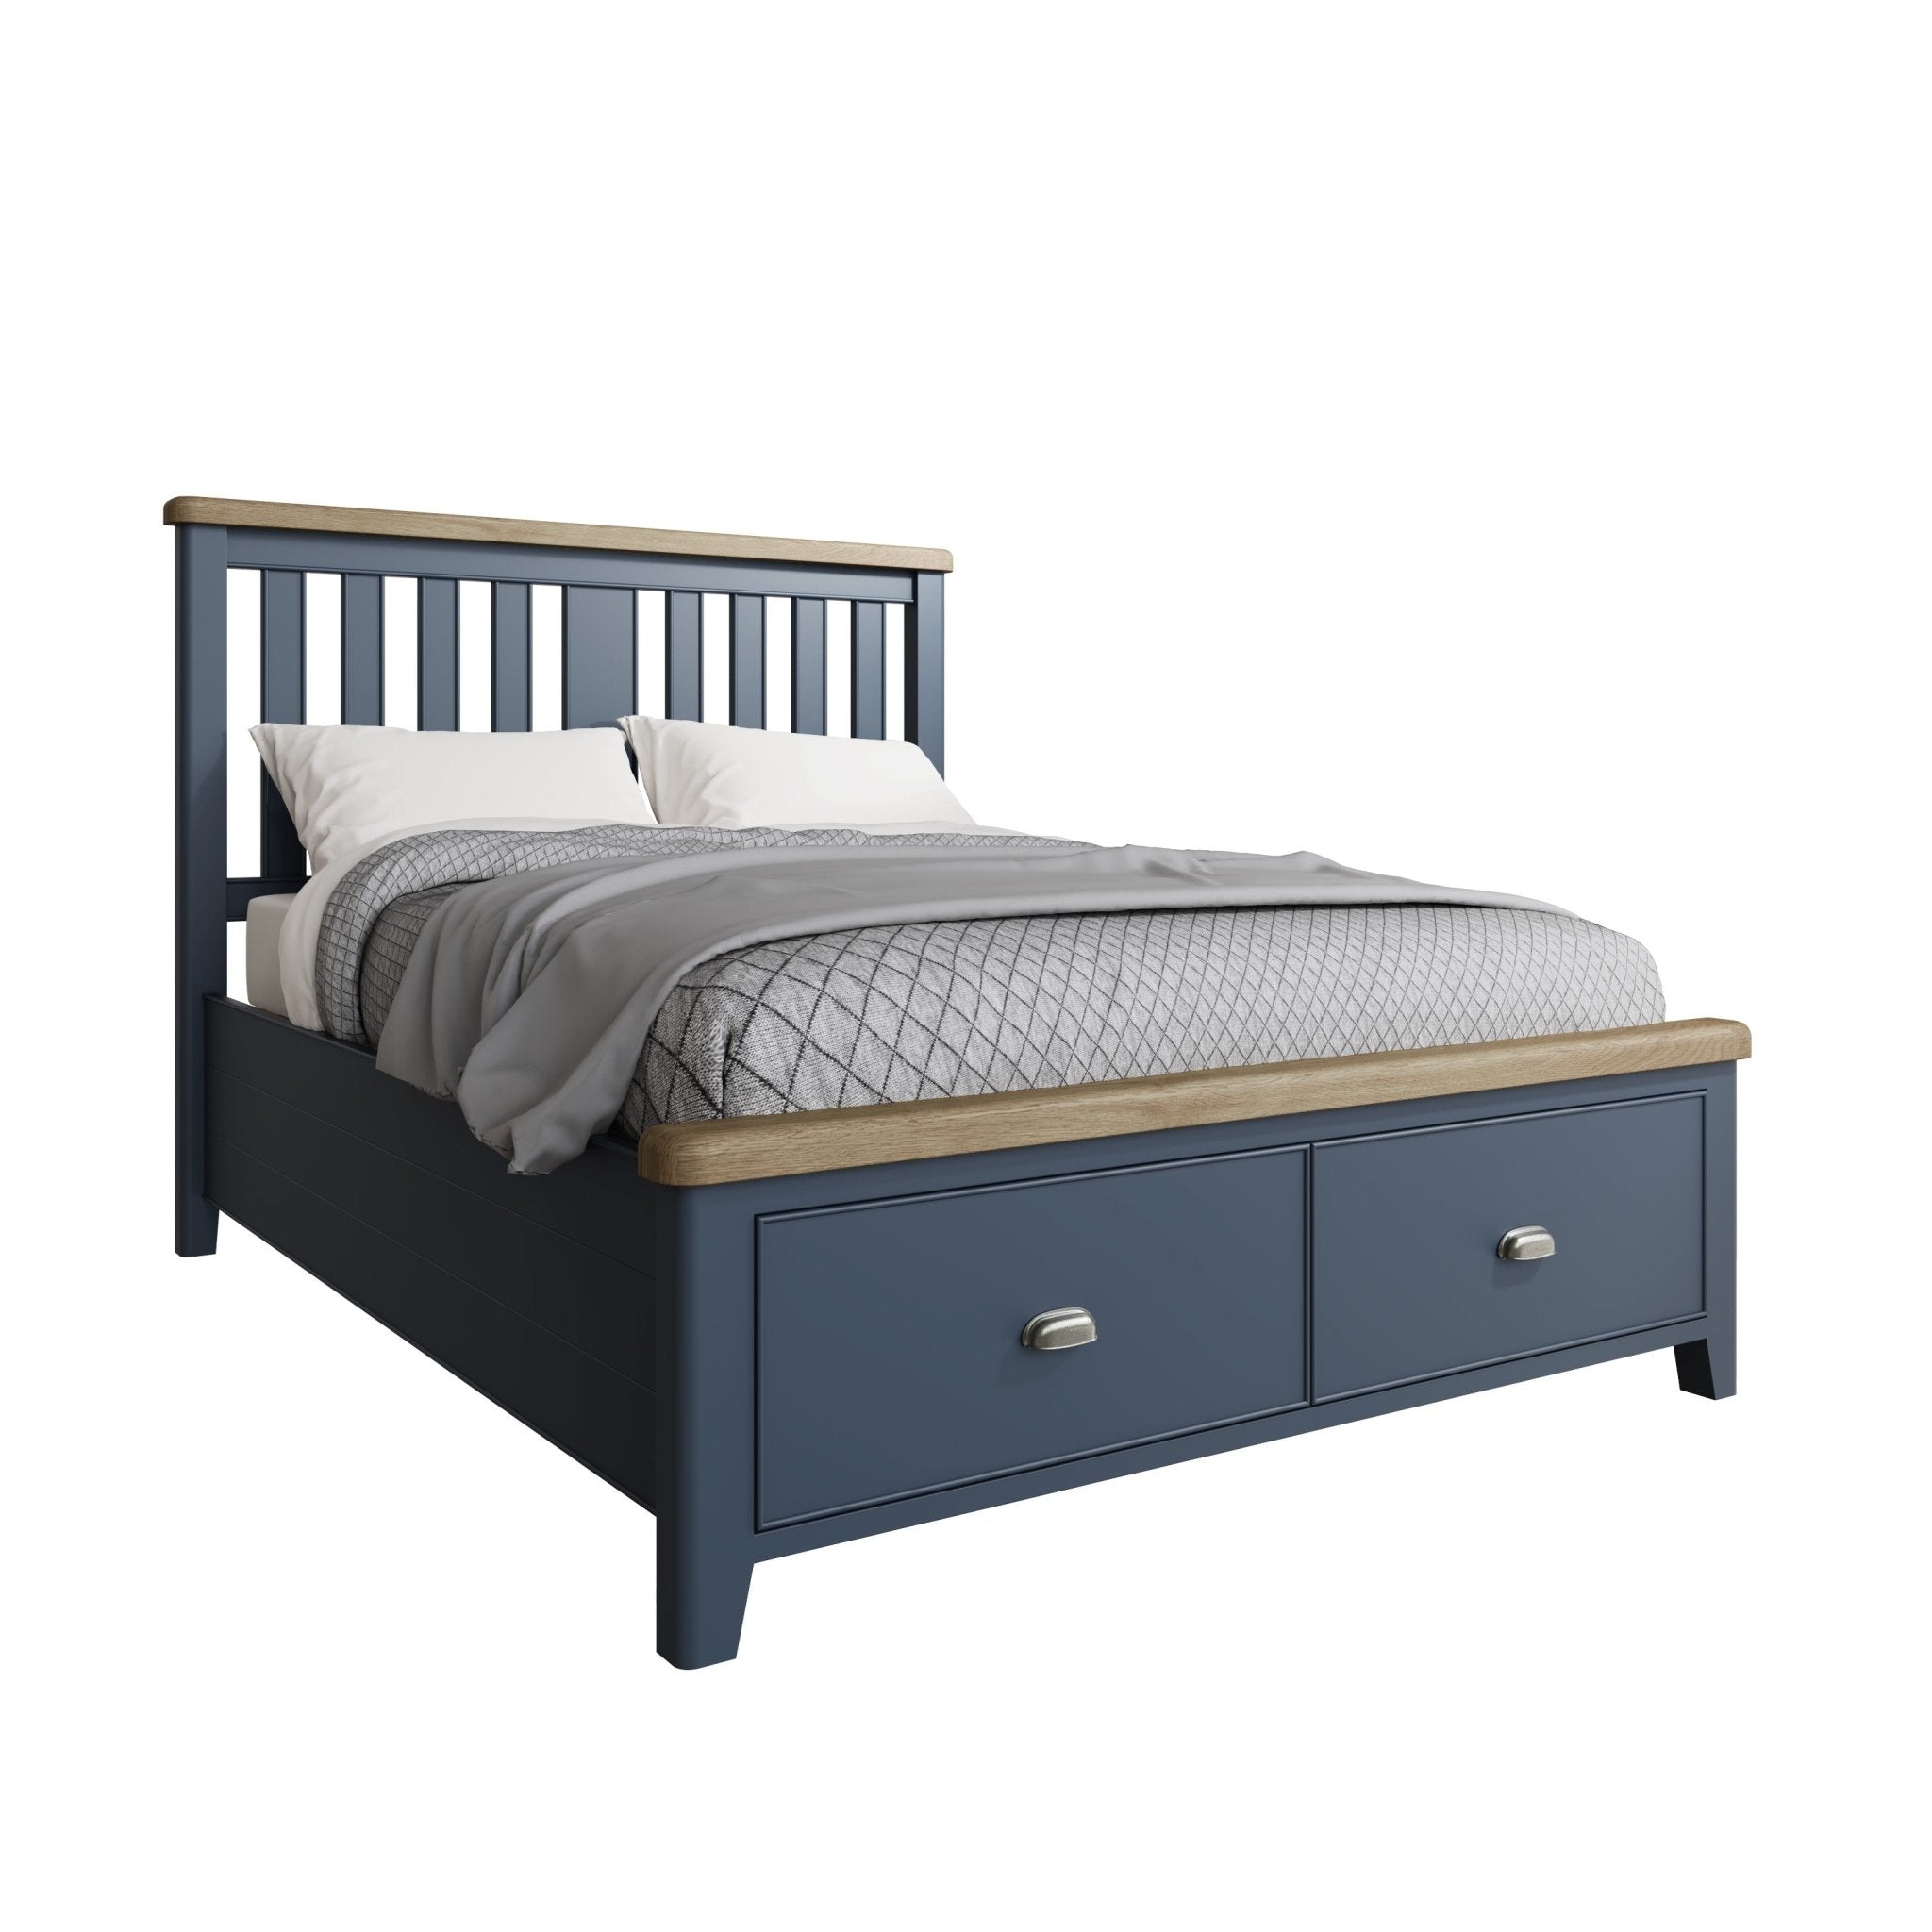 Rogate Blue 4'6 Double Bed Frame - Wooden Headboard & Drawers - Duck Barn Interiors